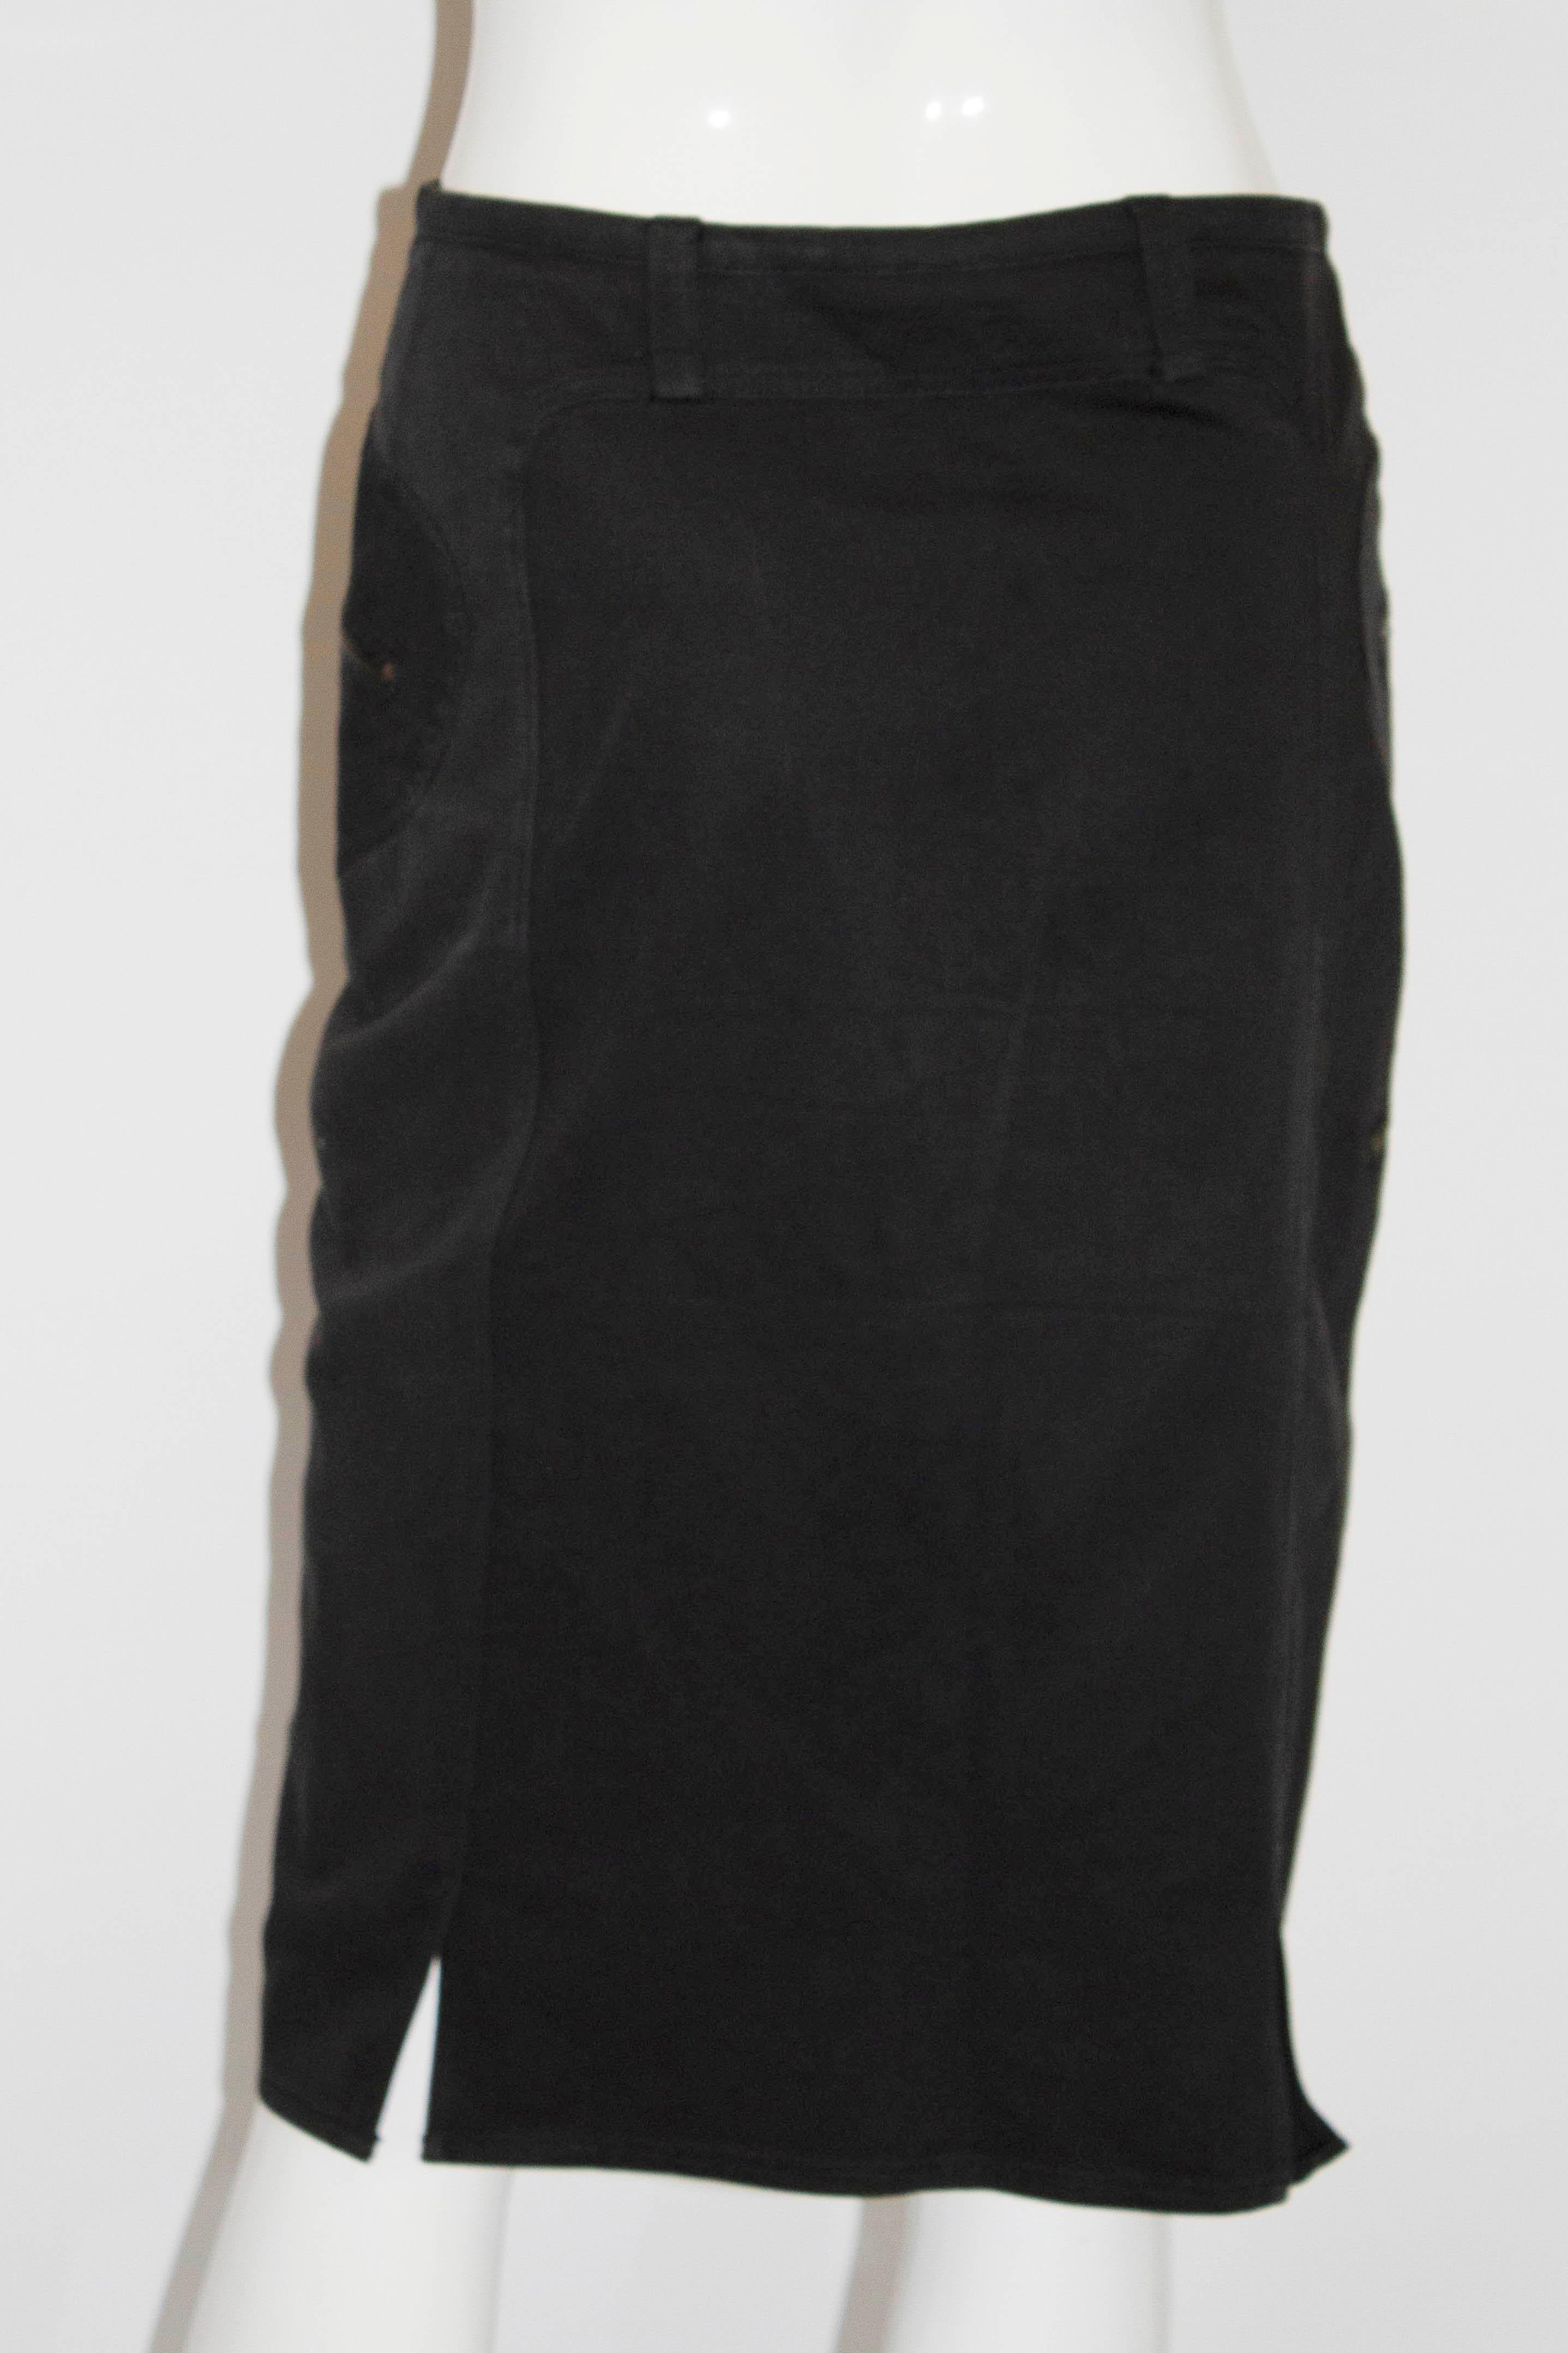 Vintage Versace Black, Skirt In Good Condition For Sale In London, GB